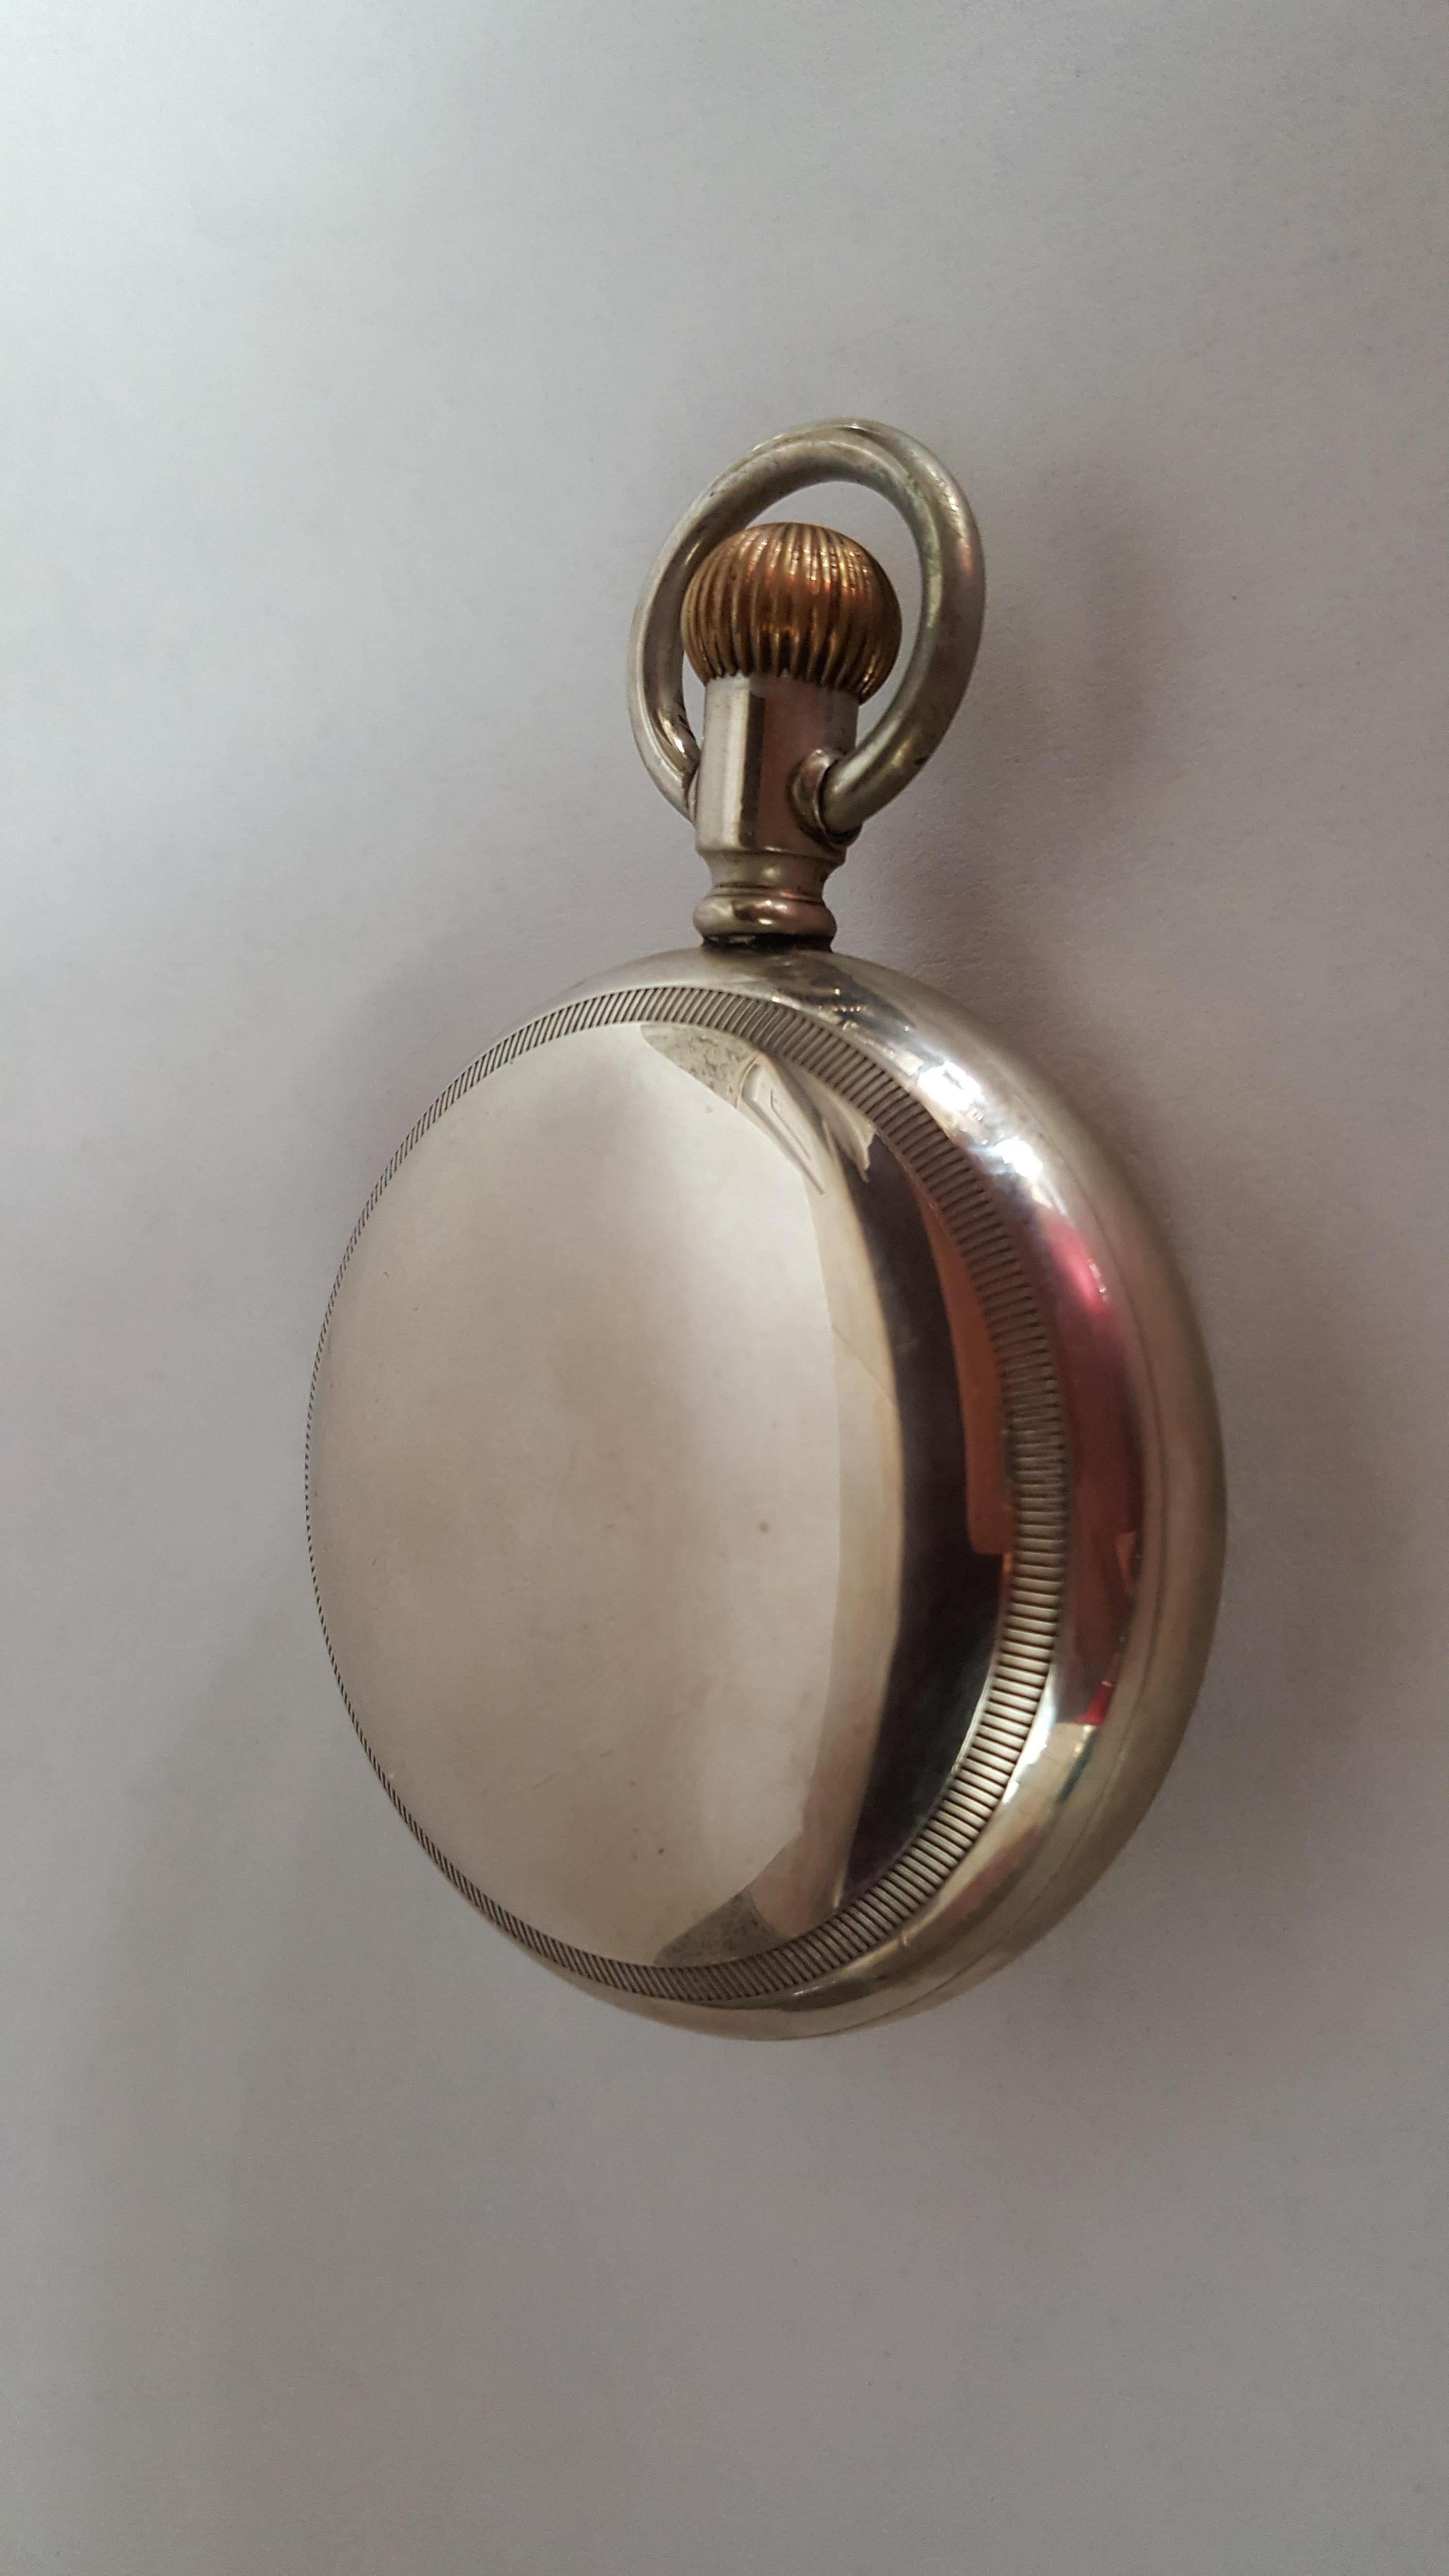 Vintage Early 1900's Elgin Silver Pocket Watch, 17 Jewel, Signed B. W. Raymond, Chronograph, 54mm Case, Very Good Condition, Screw Back, Fay's Ore Silver Casing.

This watch has not been serviced with a complete clean and overhaul and it's sold as